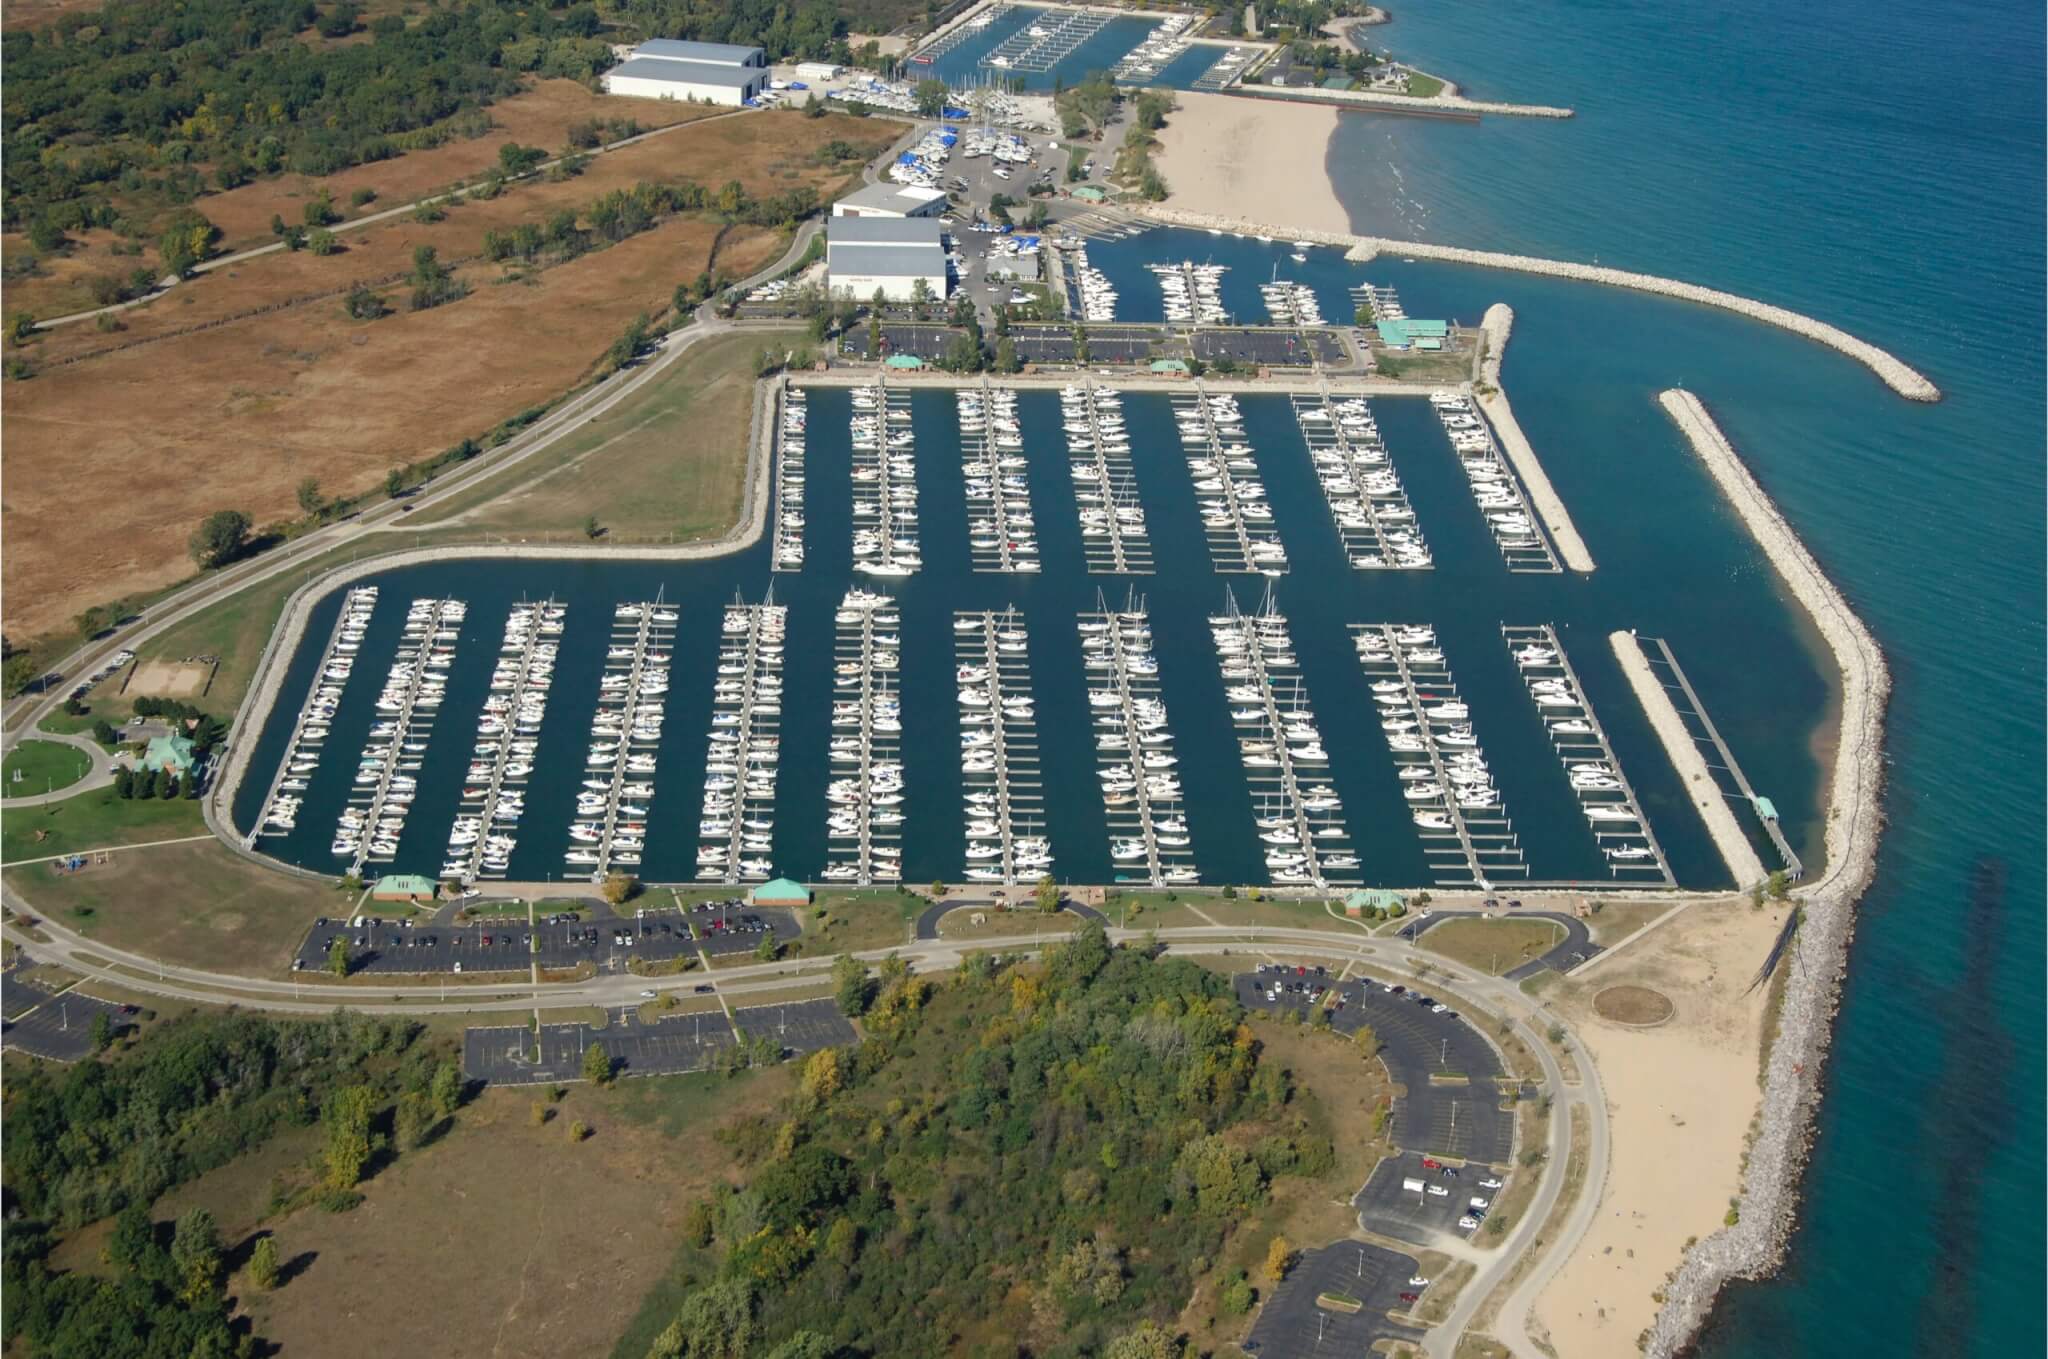 Aerial view of boat slips and North Point Marina